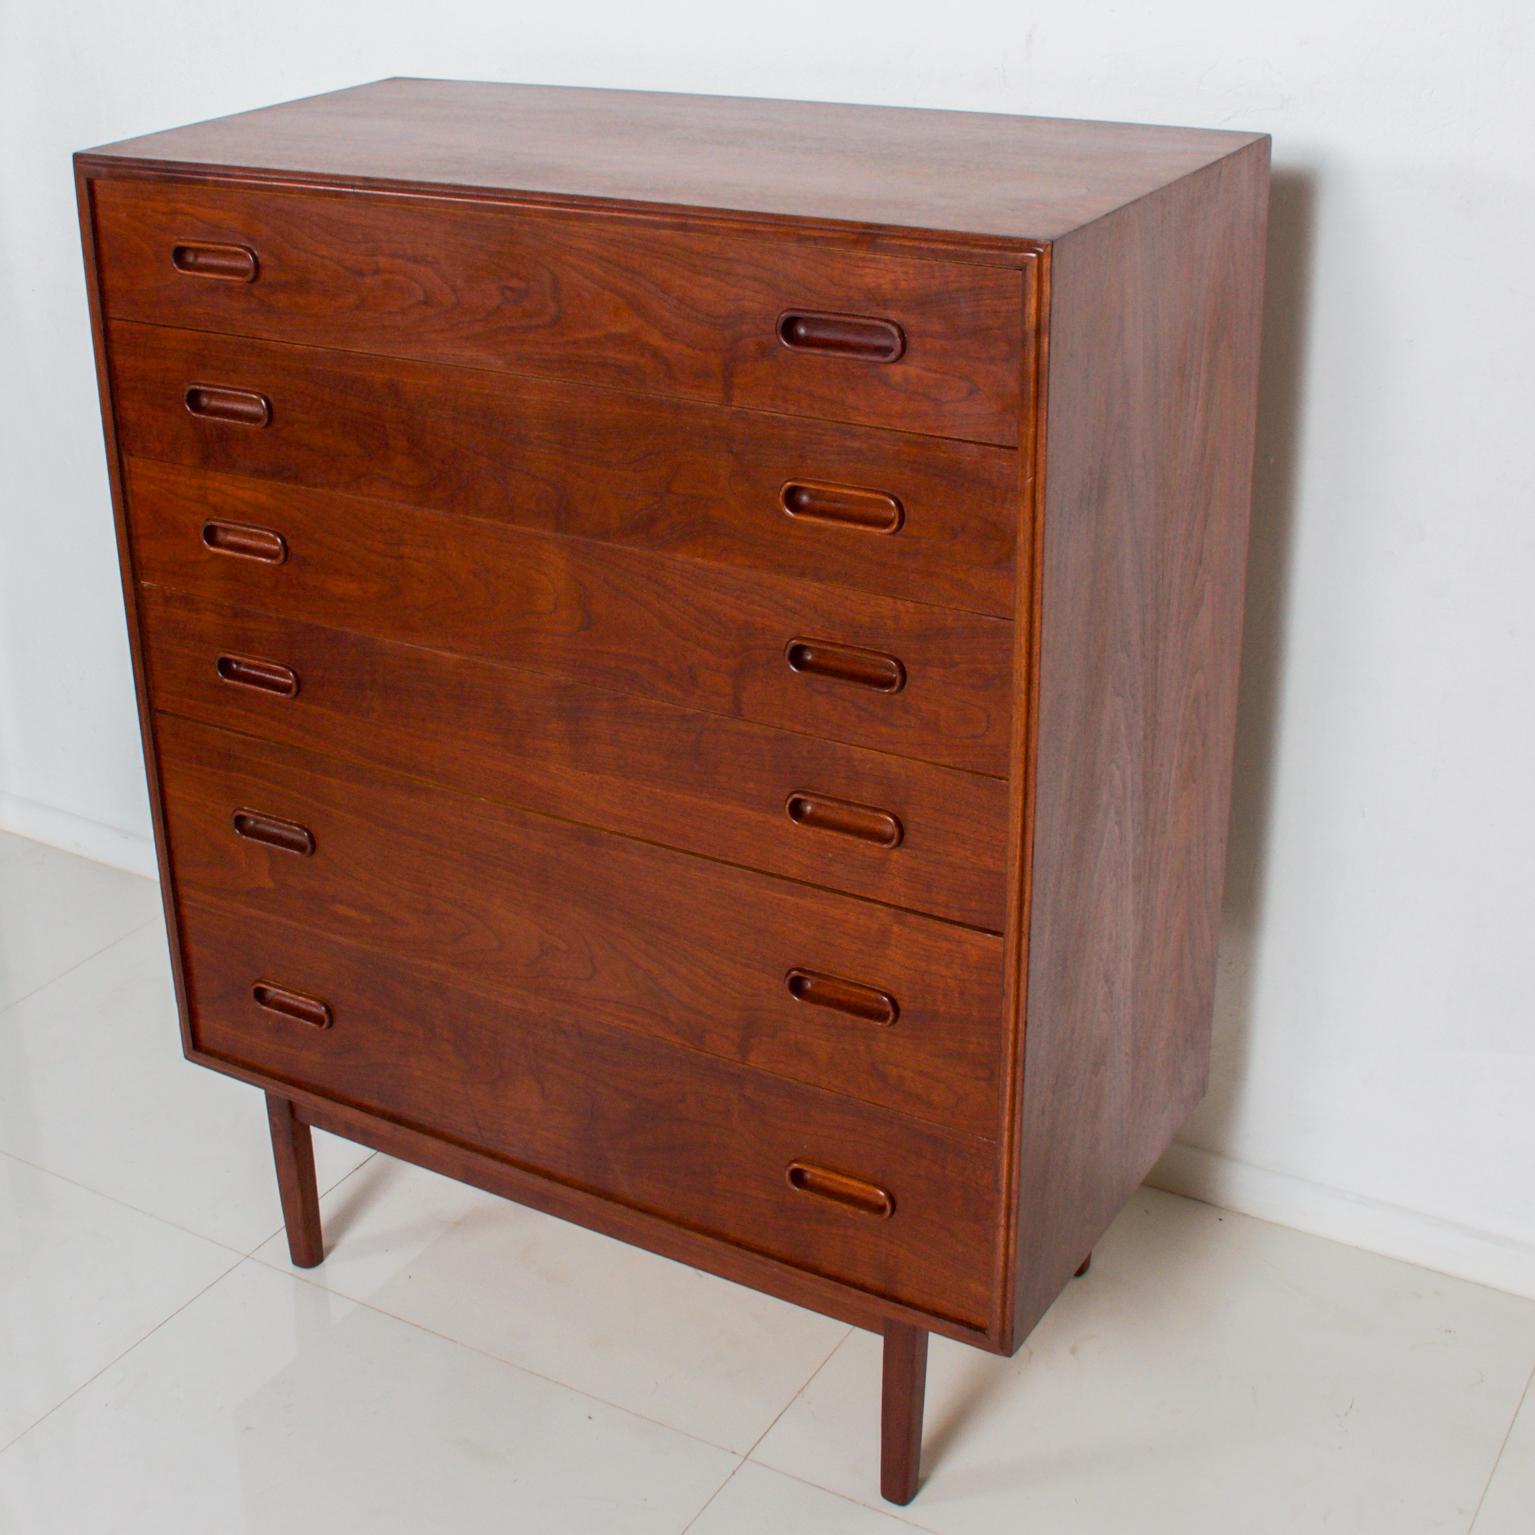 MCM exquisite black walnut highboy-chest of drawers vintage, USA, 1960s. Nakashima simple style features exquisite wood grain.
No label.
Dimensions: 45 1/8